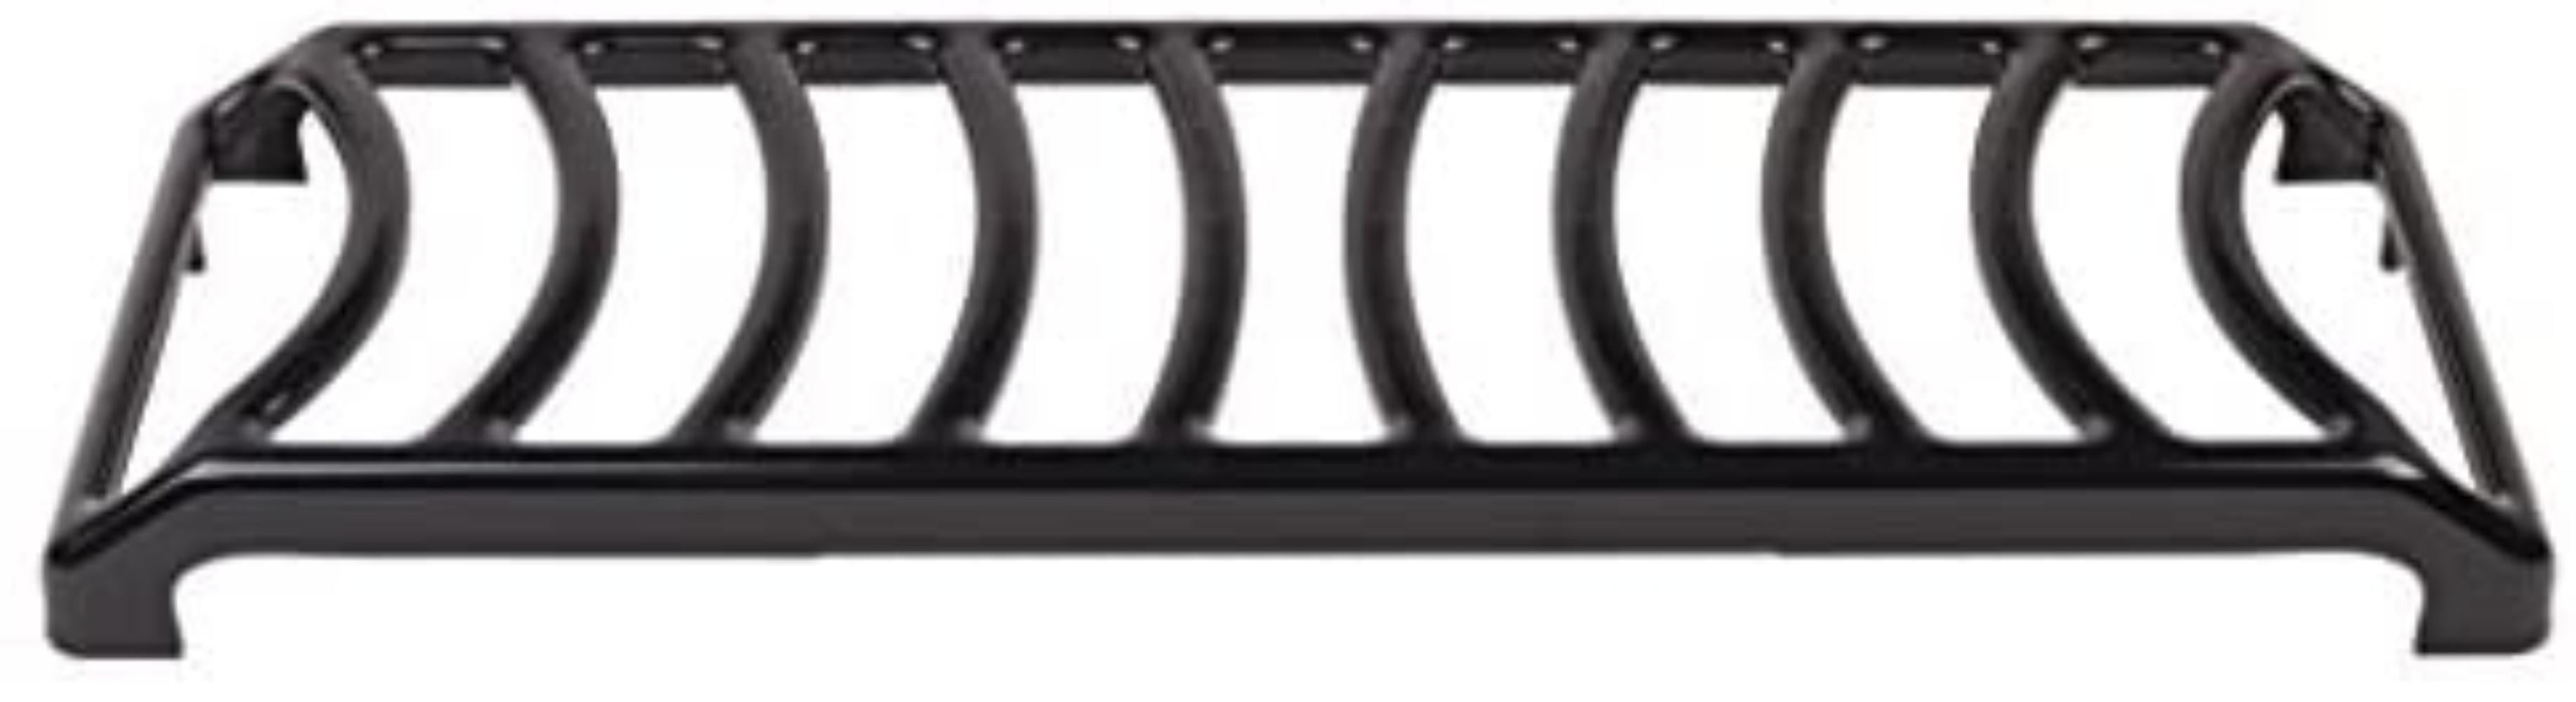 Atwood 57190 Black Replacement Grate for Atwood Cooktops 